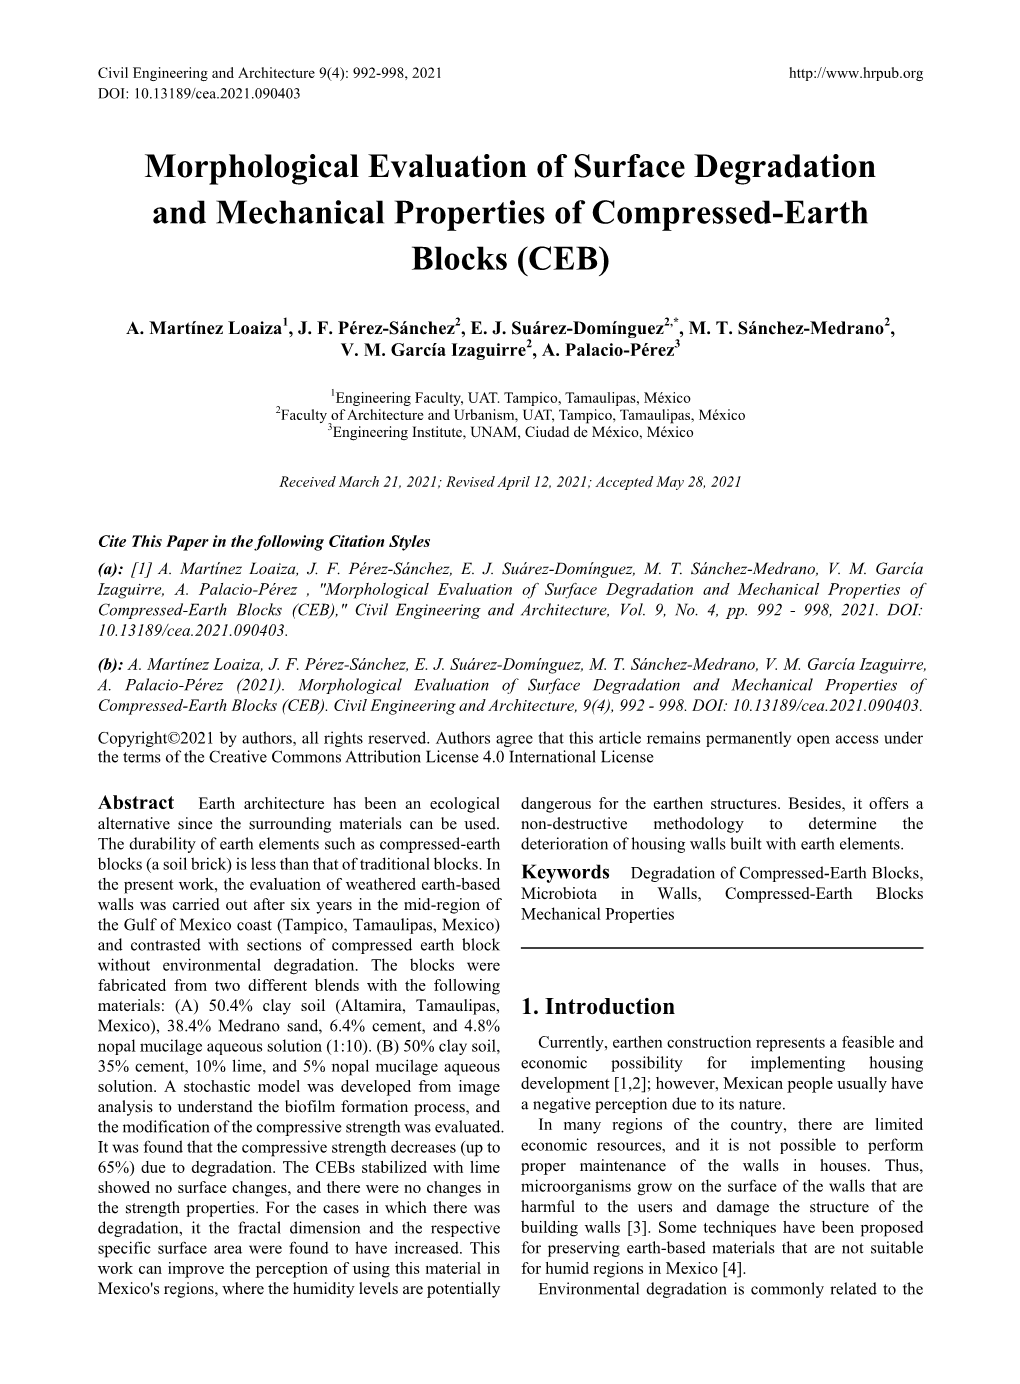 Morphological Evaluation of Surface Degradation and Mechanical Properties of Compressed-Earth Blocks (CEB)